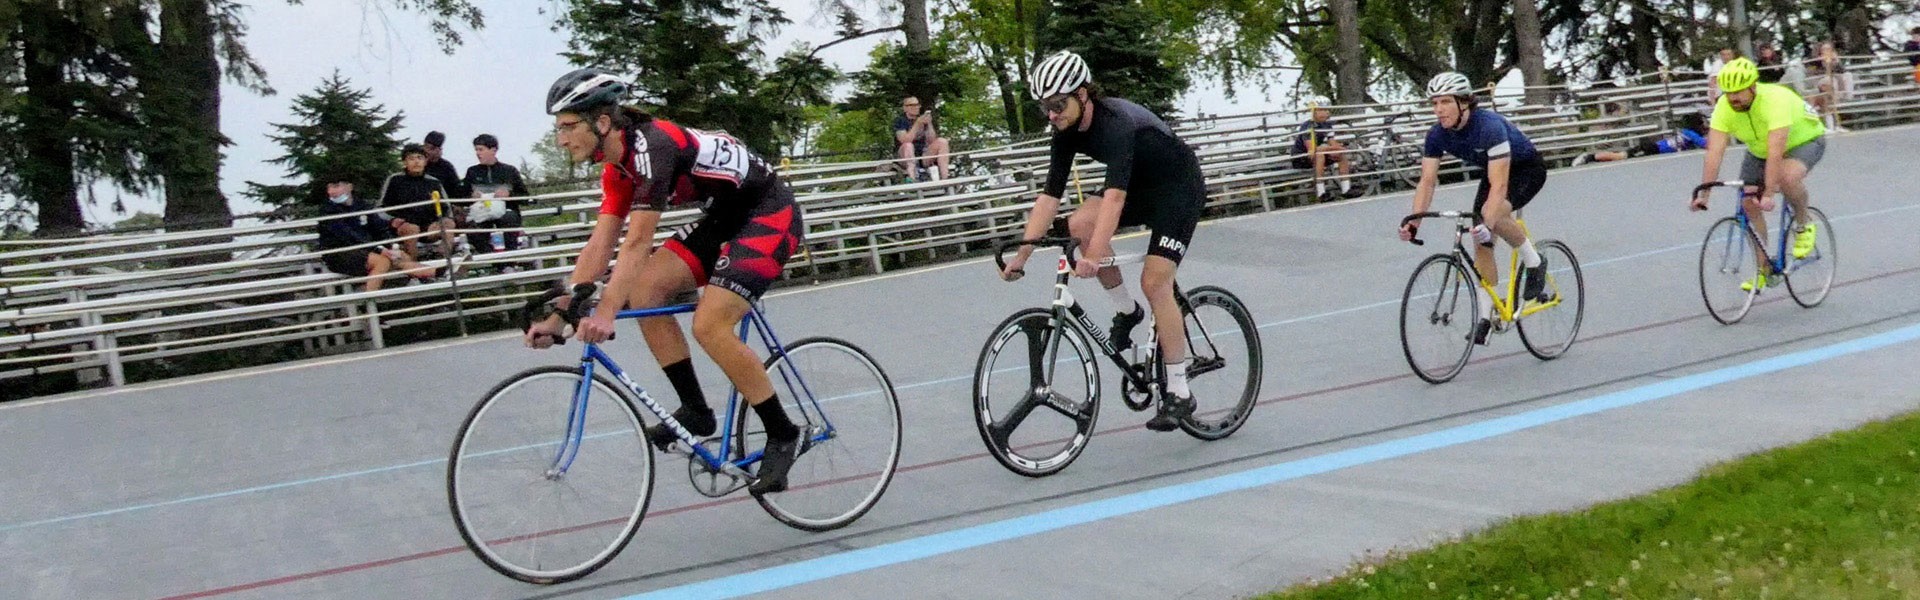 Bikers cycling the track at the Ed Rudolph Velodrome